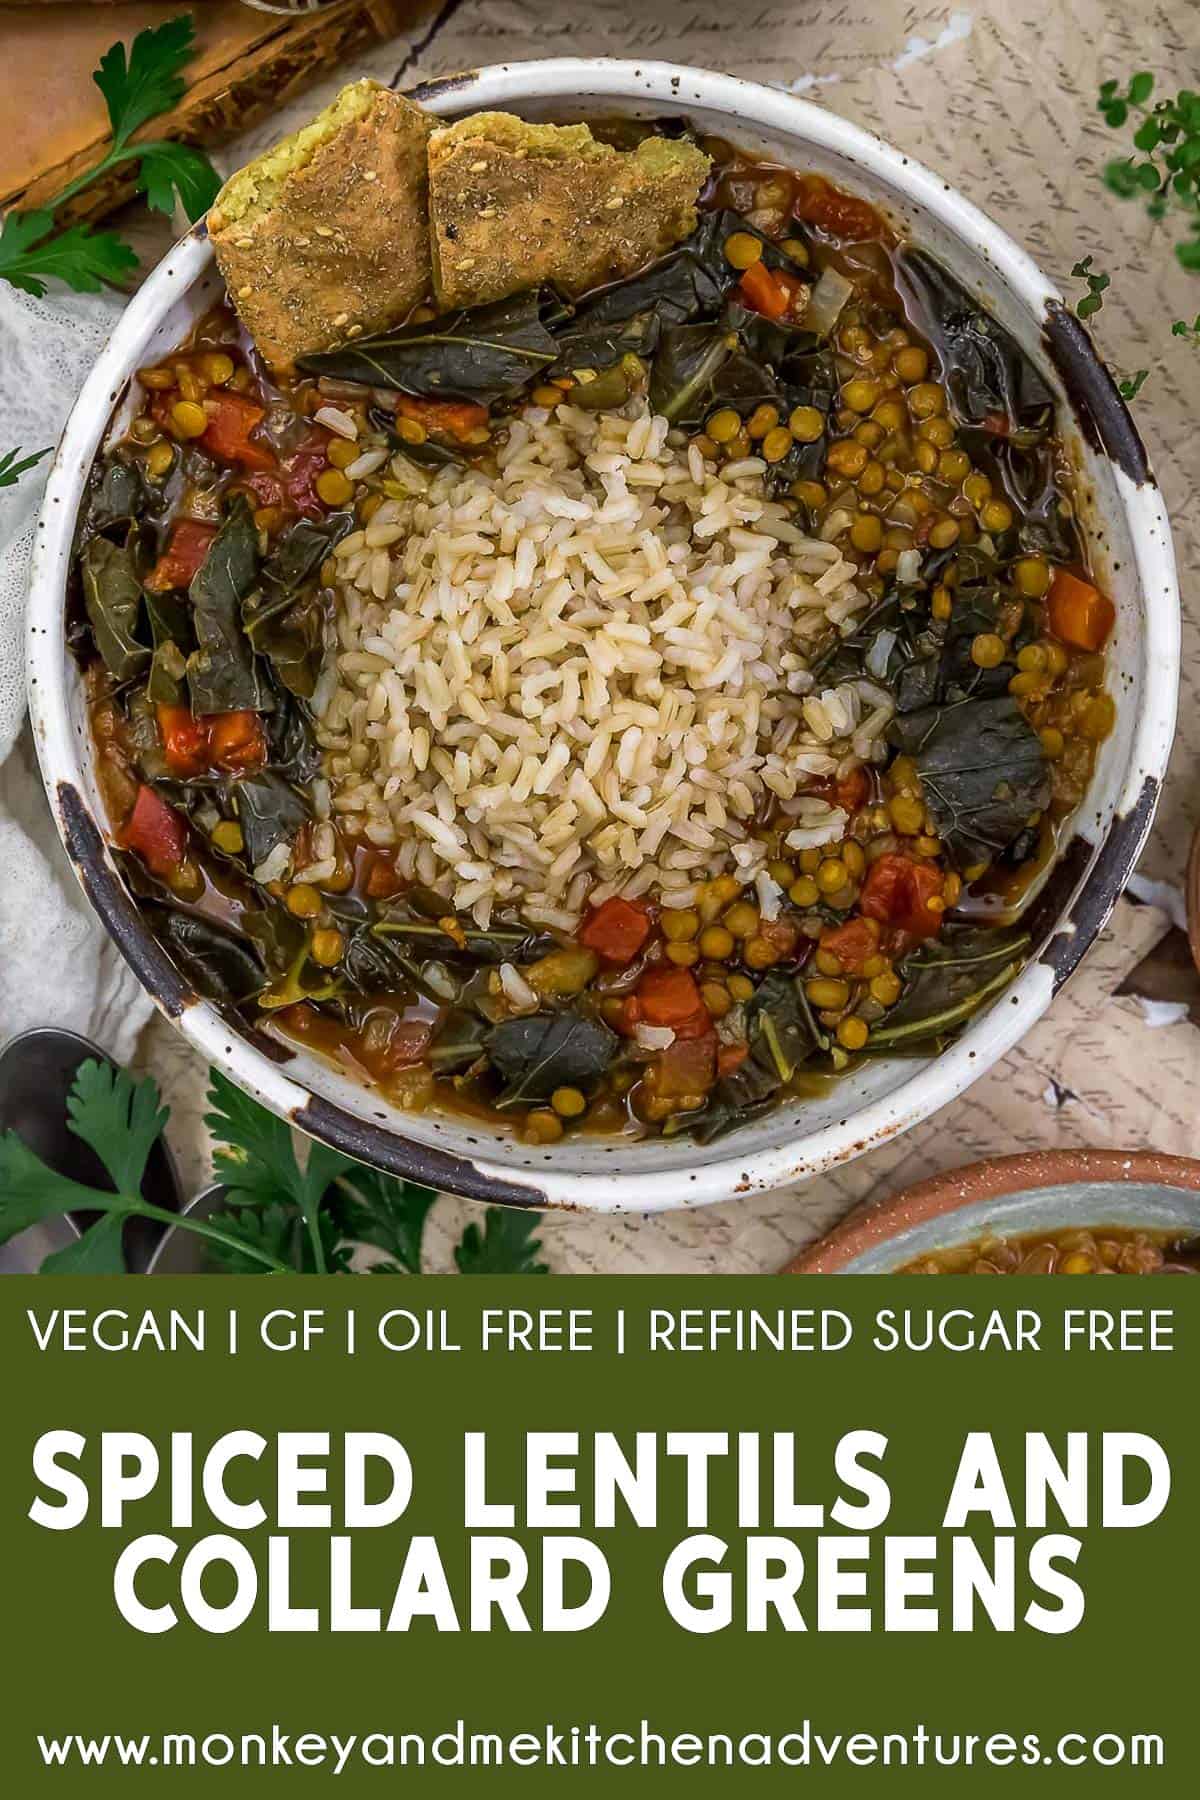 Spiced Lentils and Collard Greens with Text Description